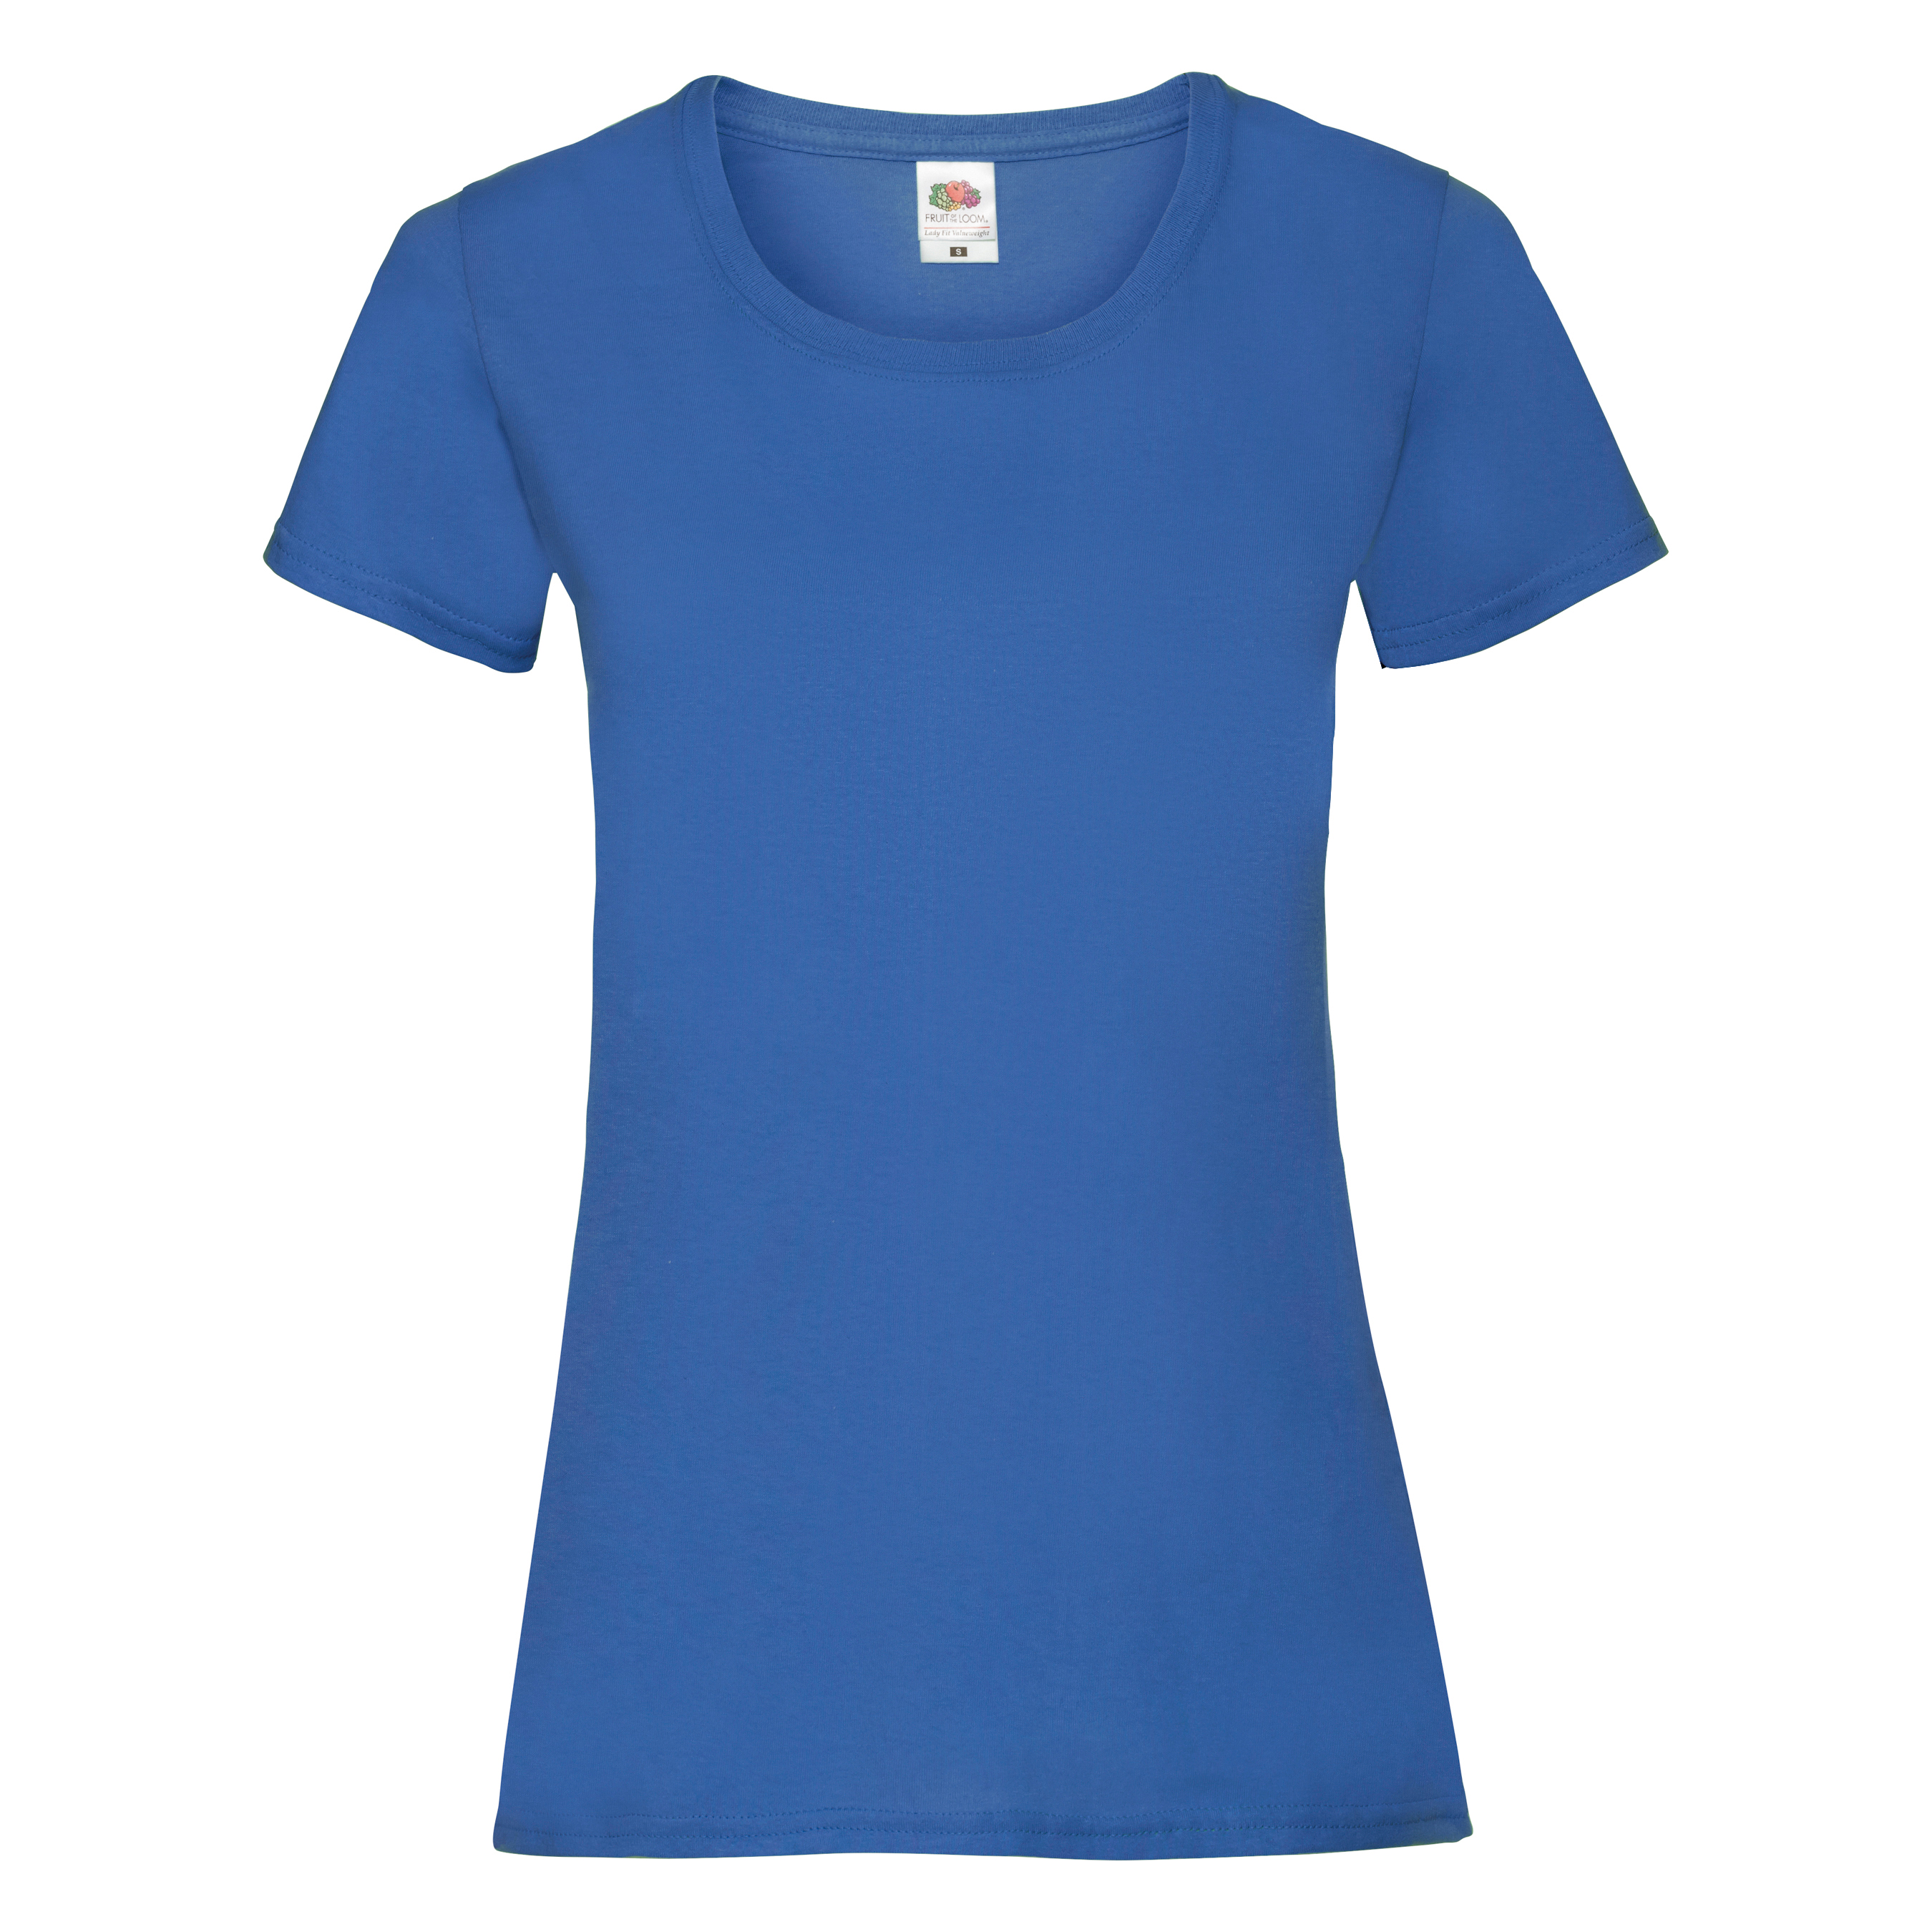 ax-httpswebsystems.s3.amazonaws.comtmp_for_downloadwomens-valueweight-royal-blue.jpg